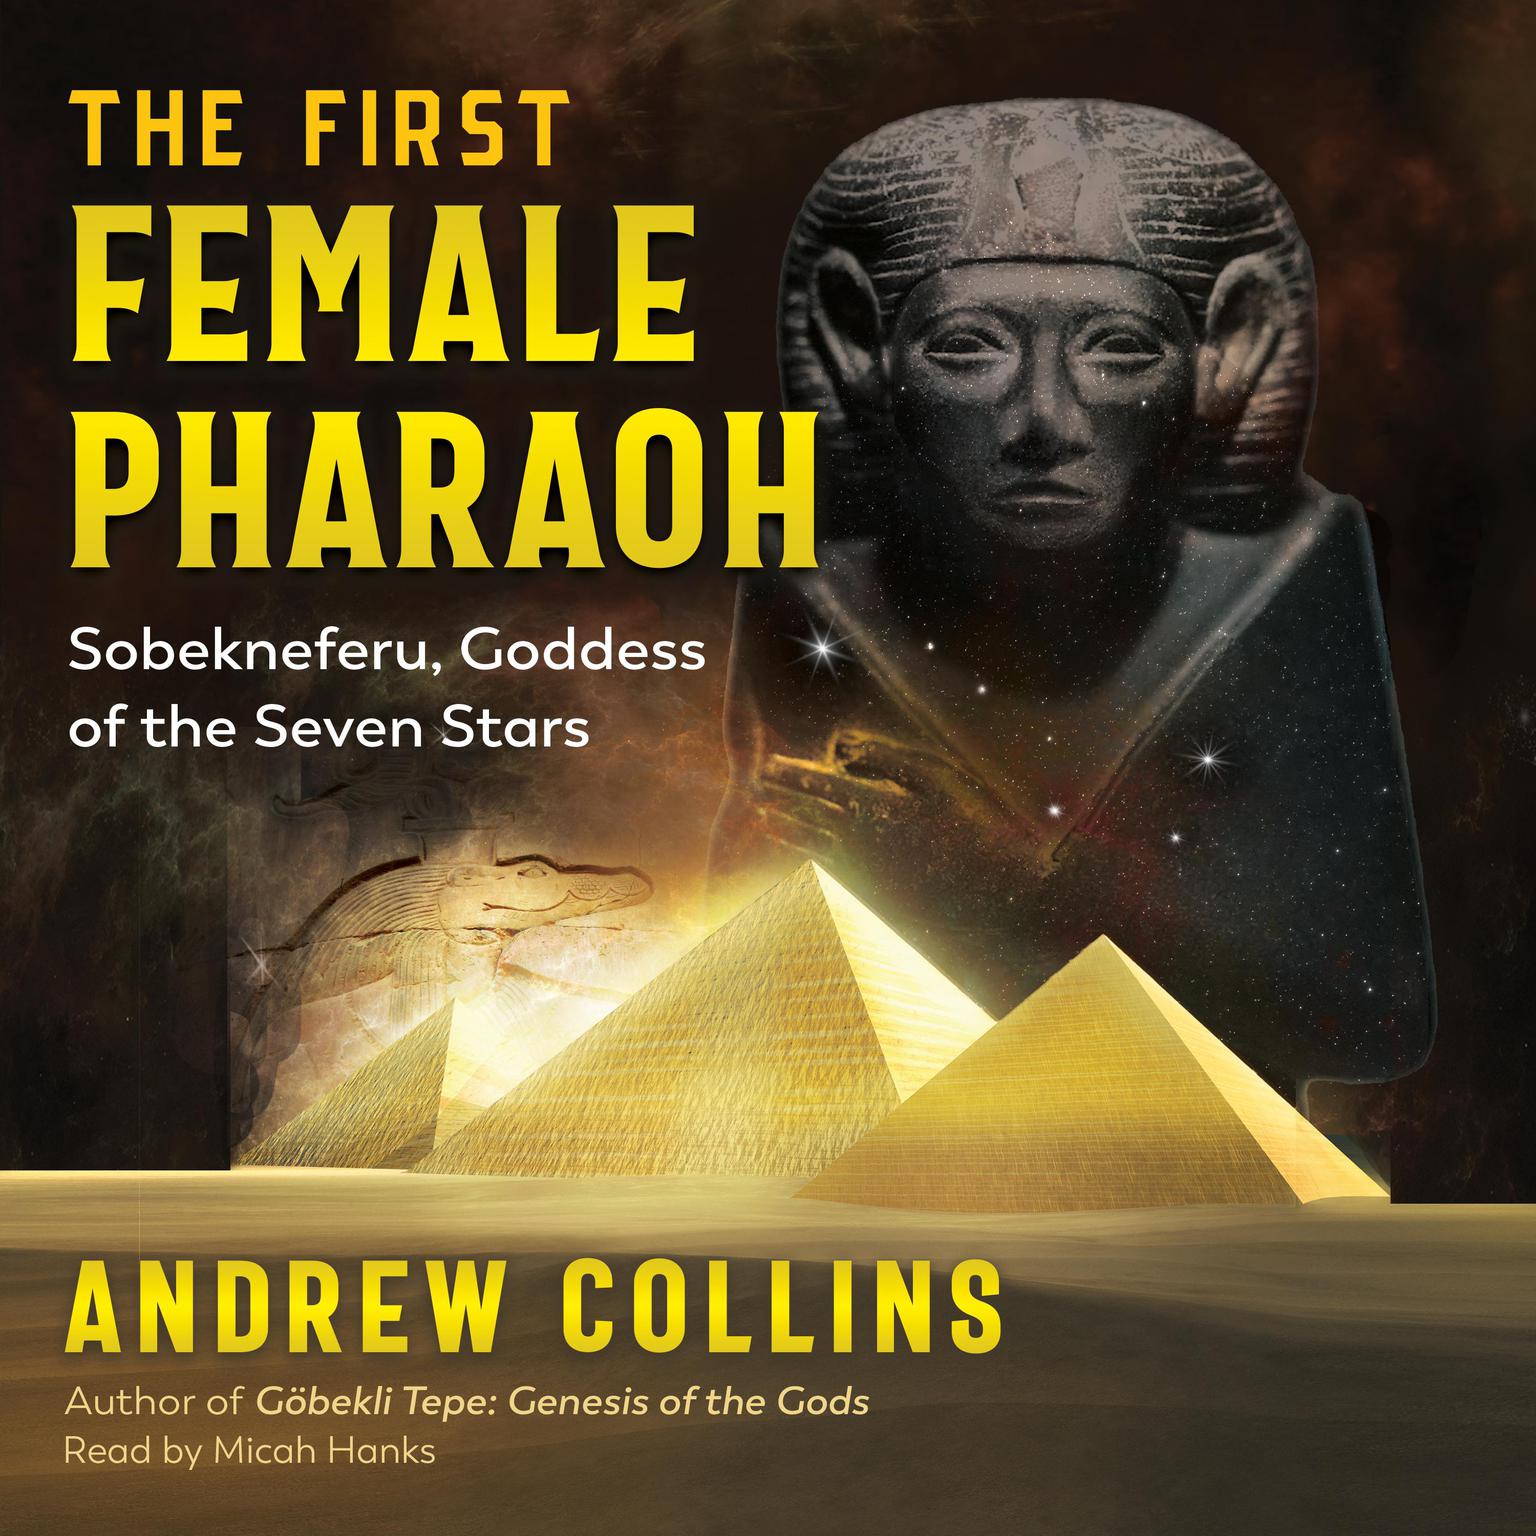 The First Female Pharaoh: Sobekneferu, Goddess of the Seven Stars Audiobook, by Andrew Collins